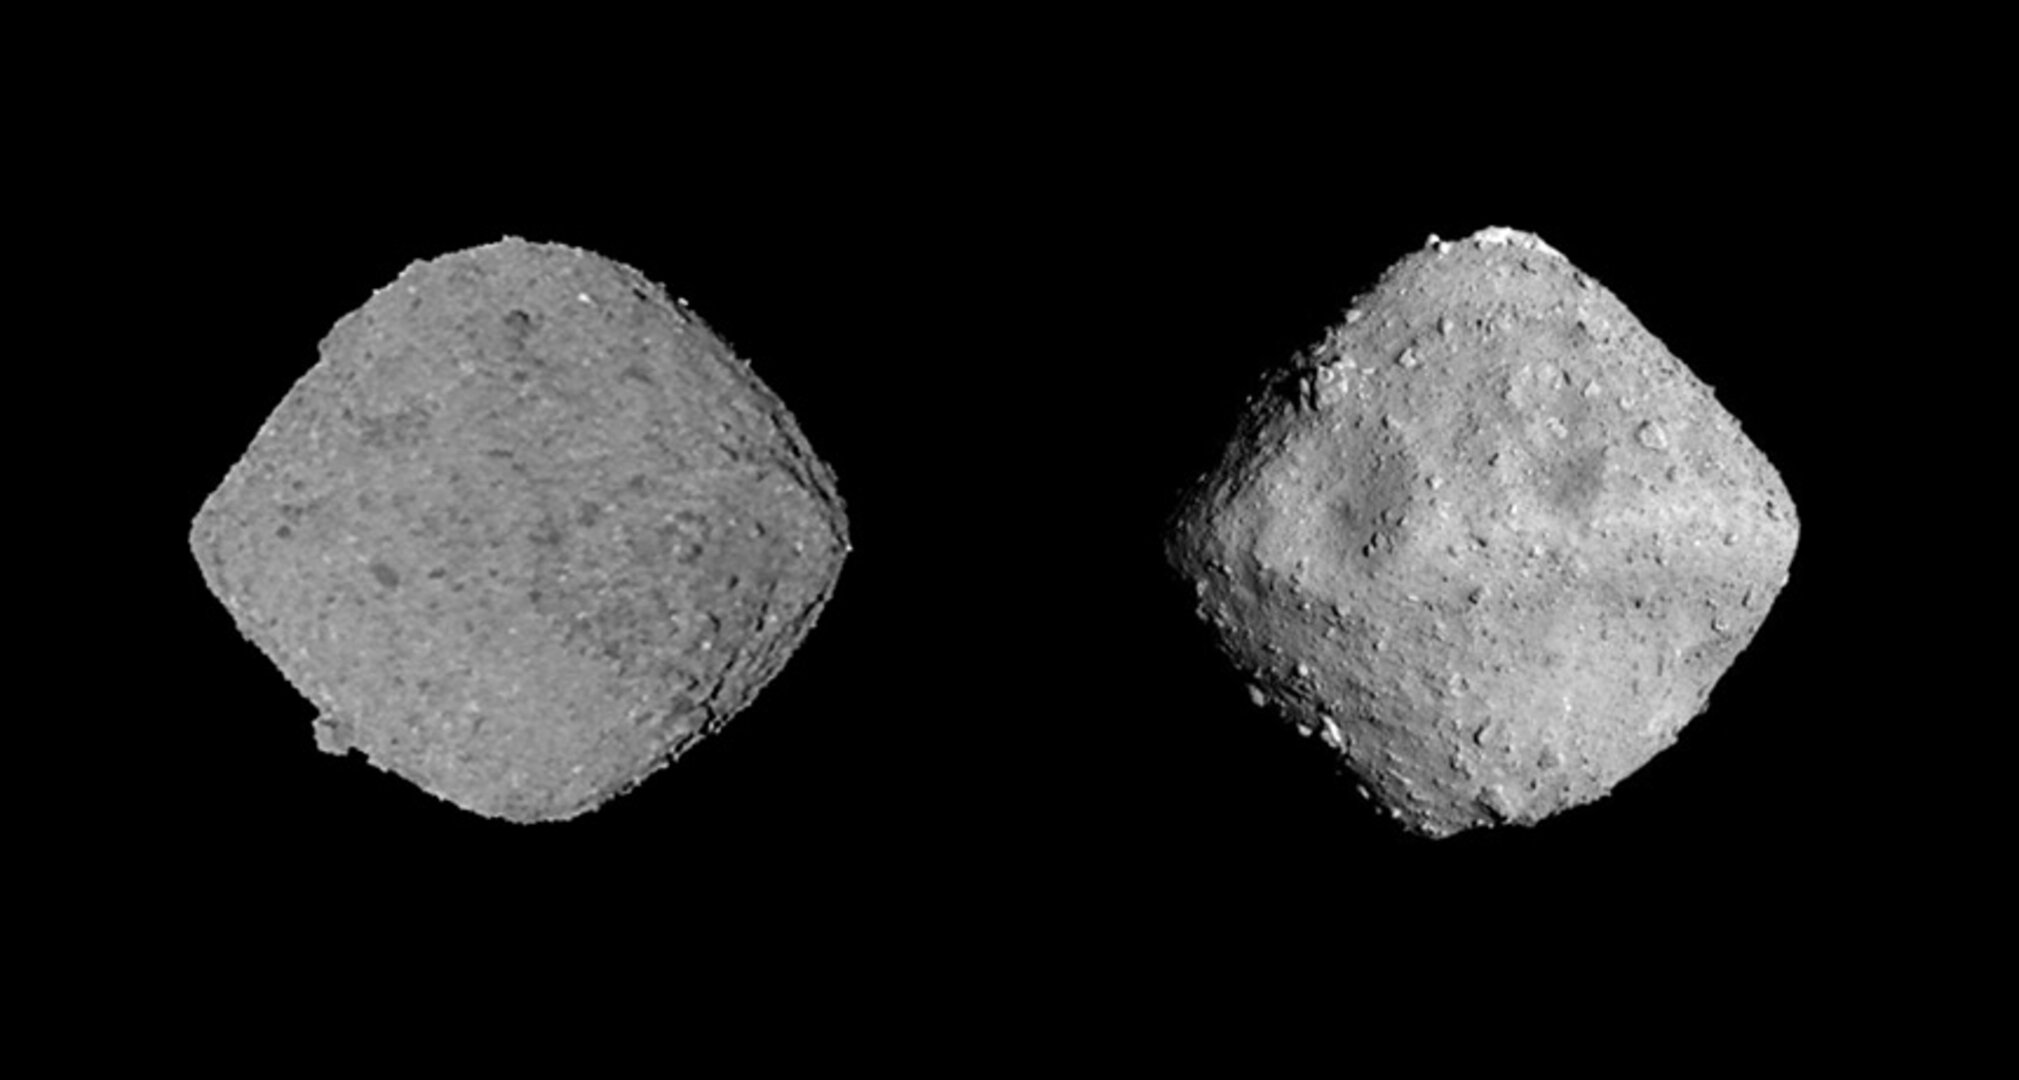 In the end, asteroid Ryugu might actually be a comet. Credit: ESA